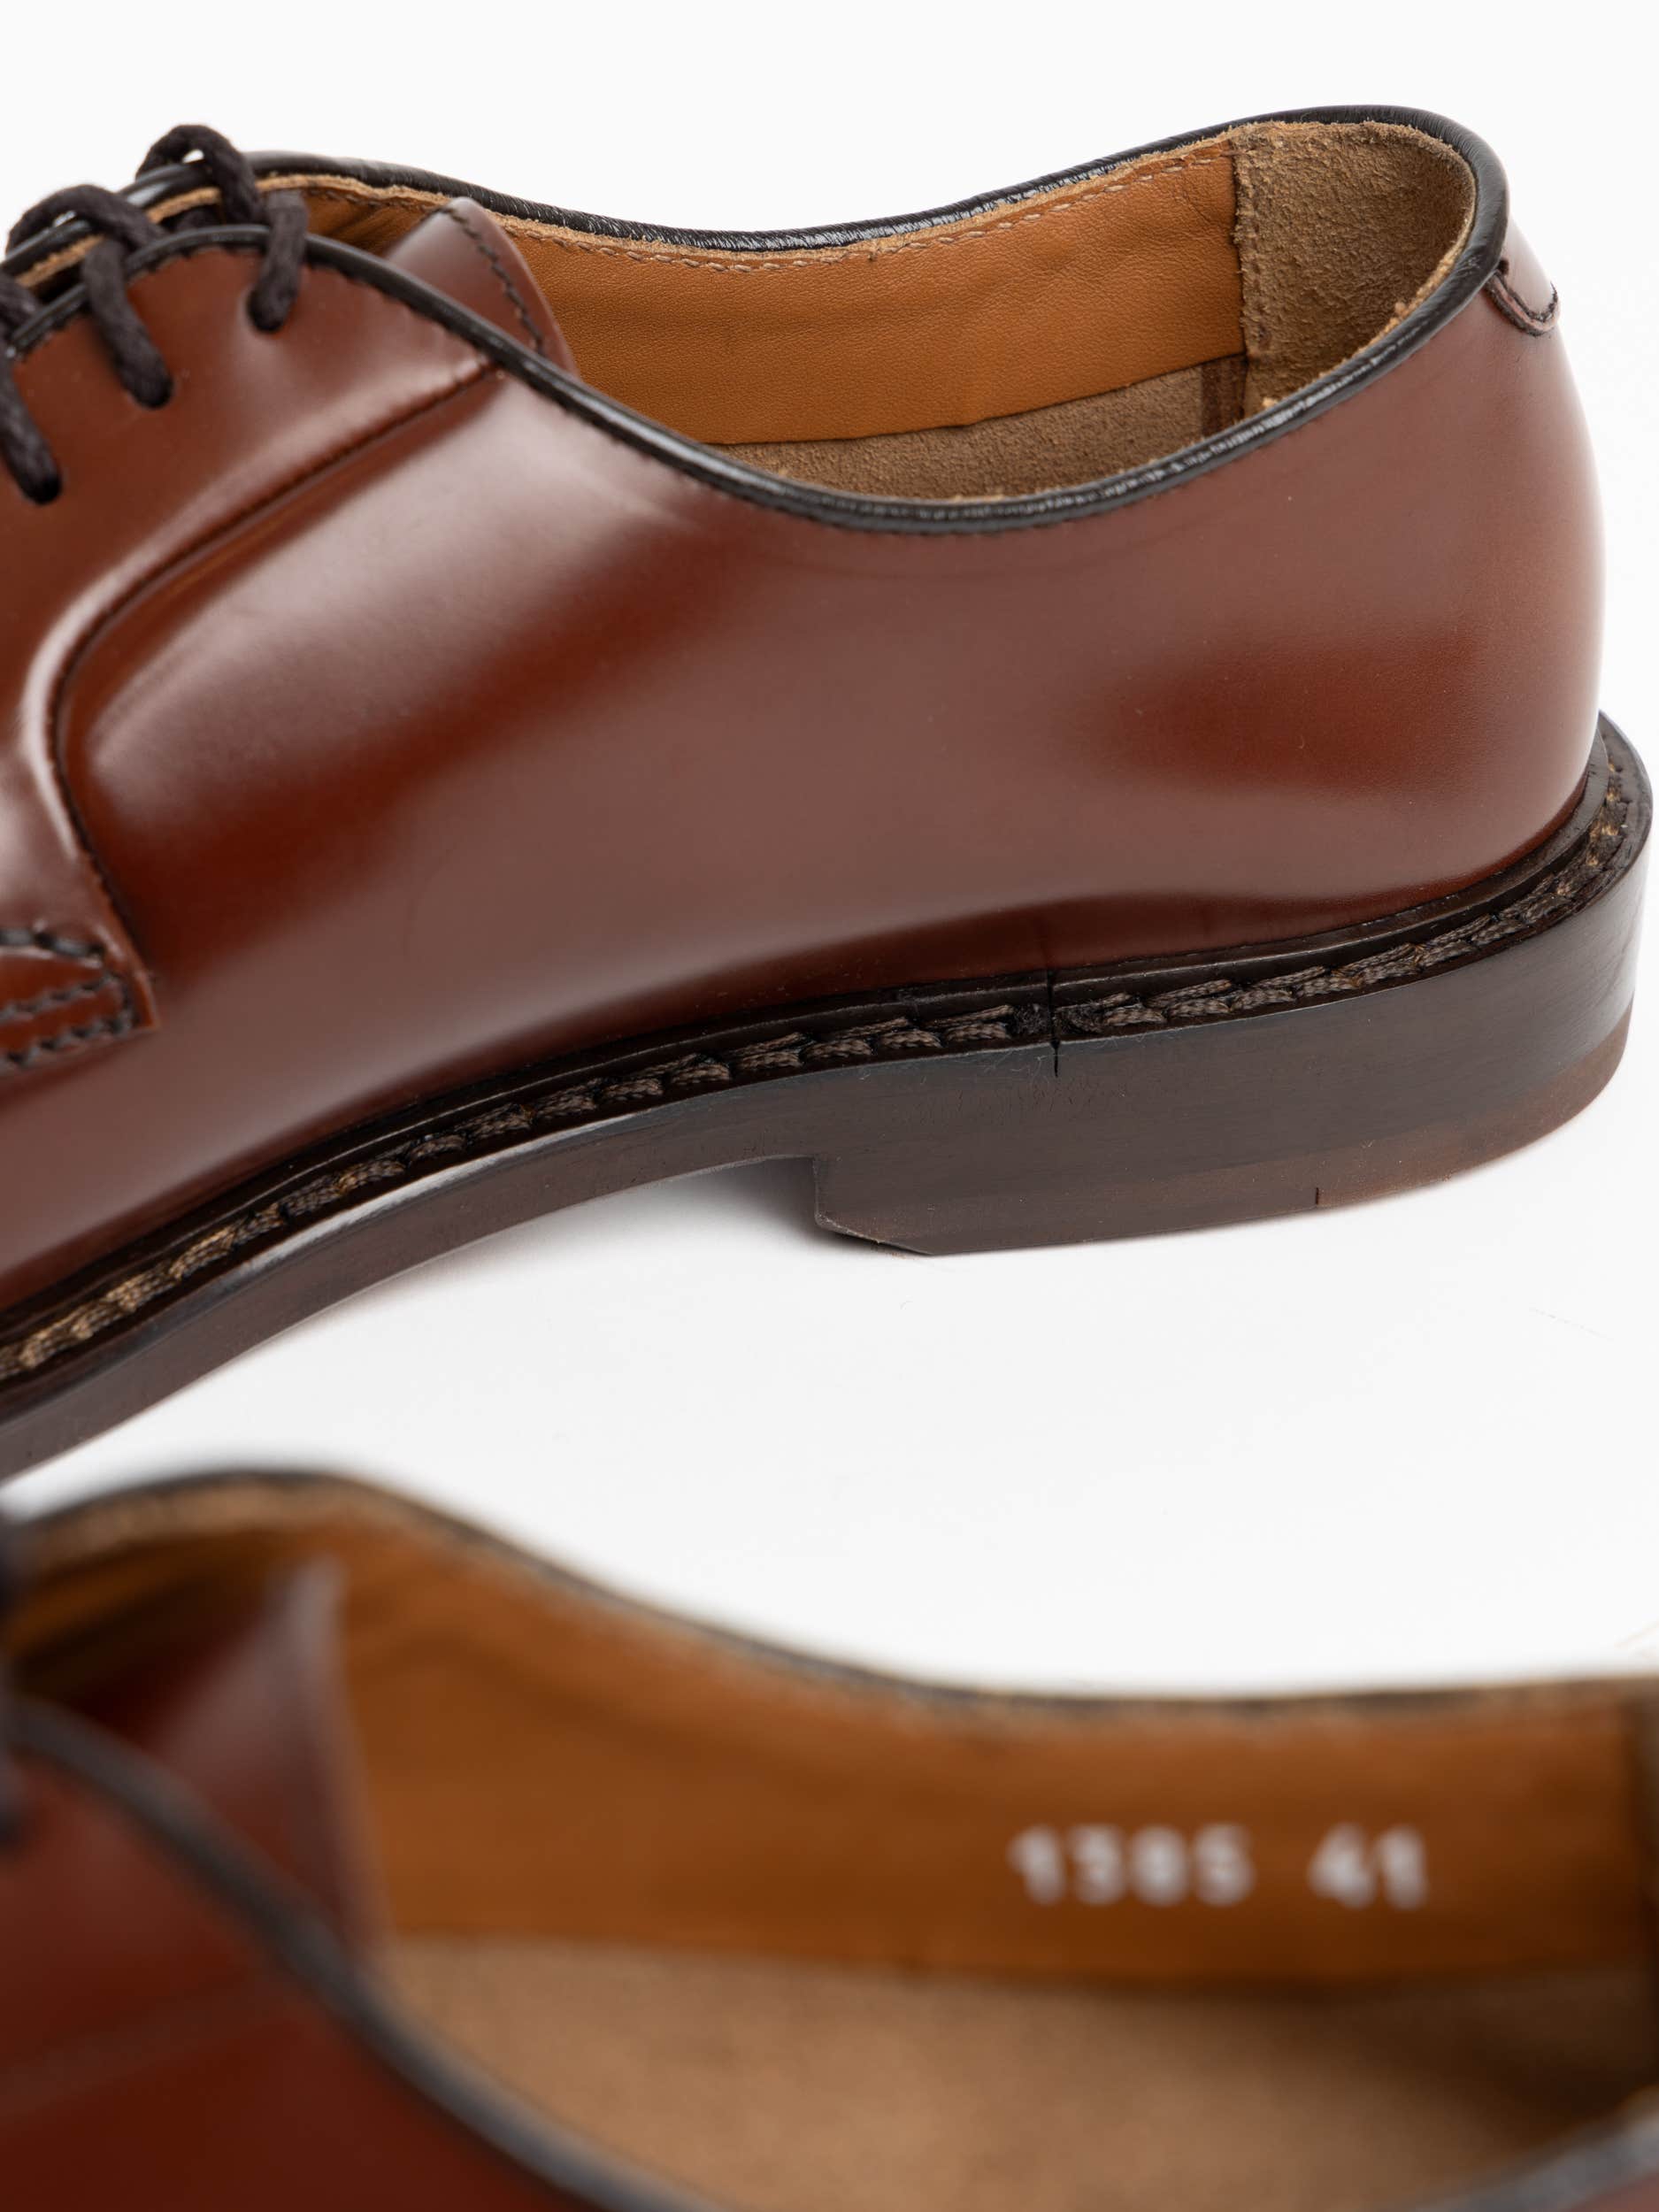 Brown Lace-Up Oxford Shoes